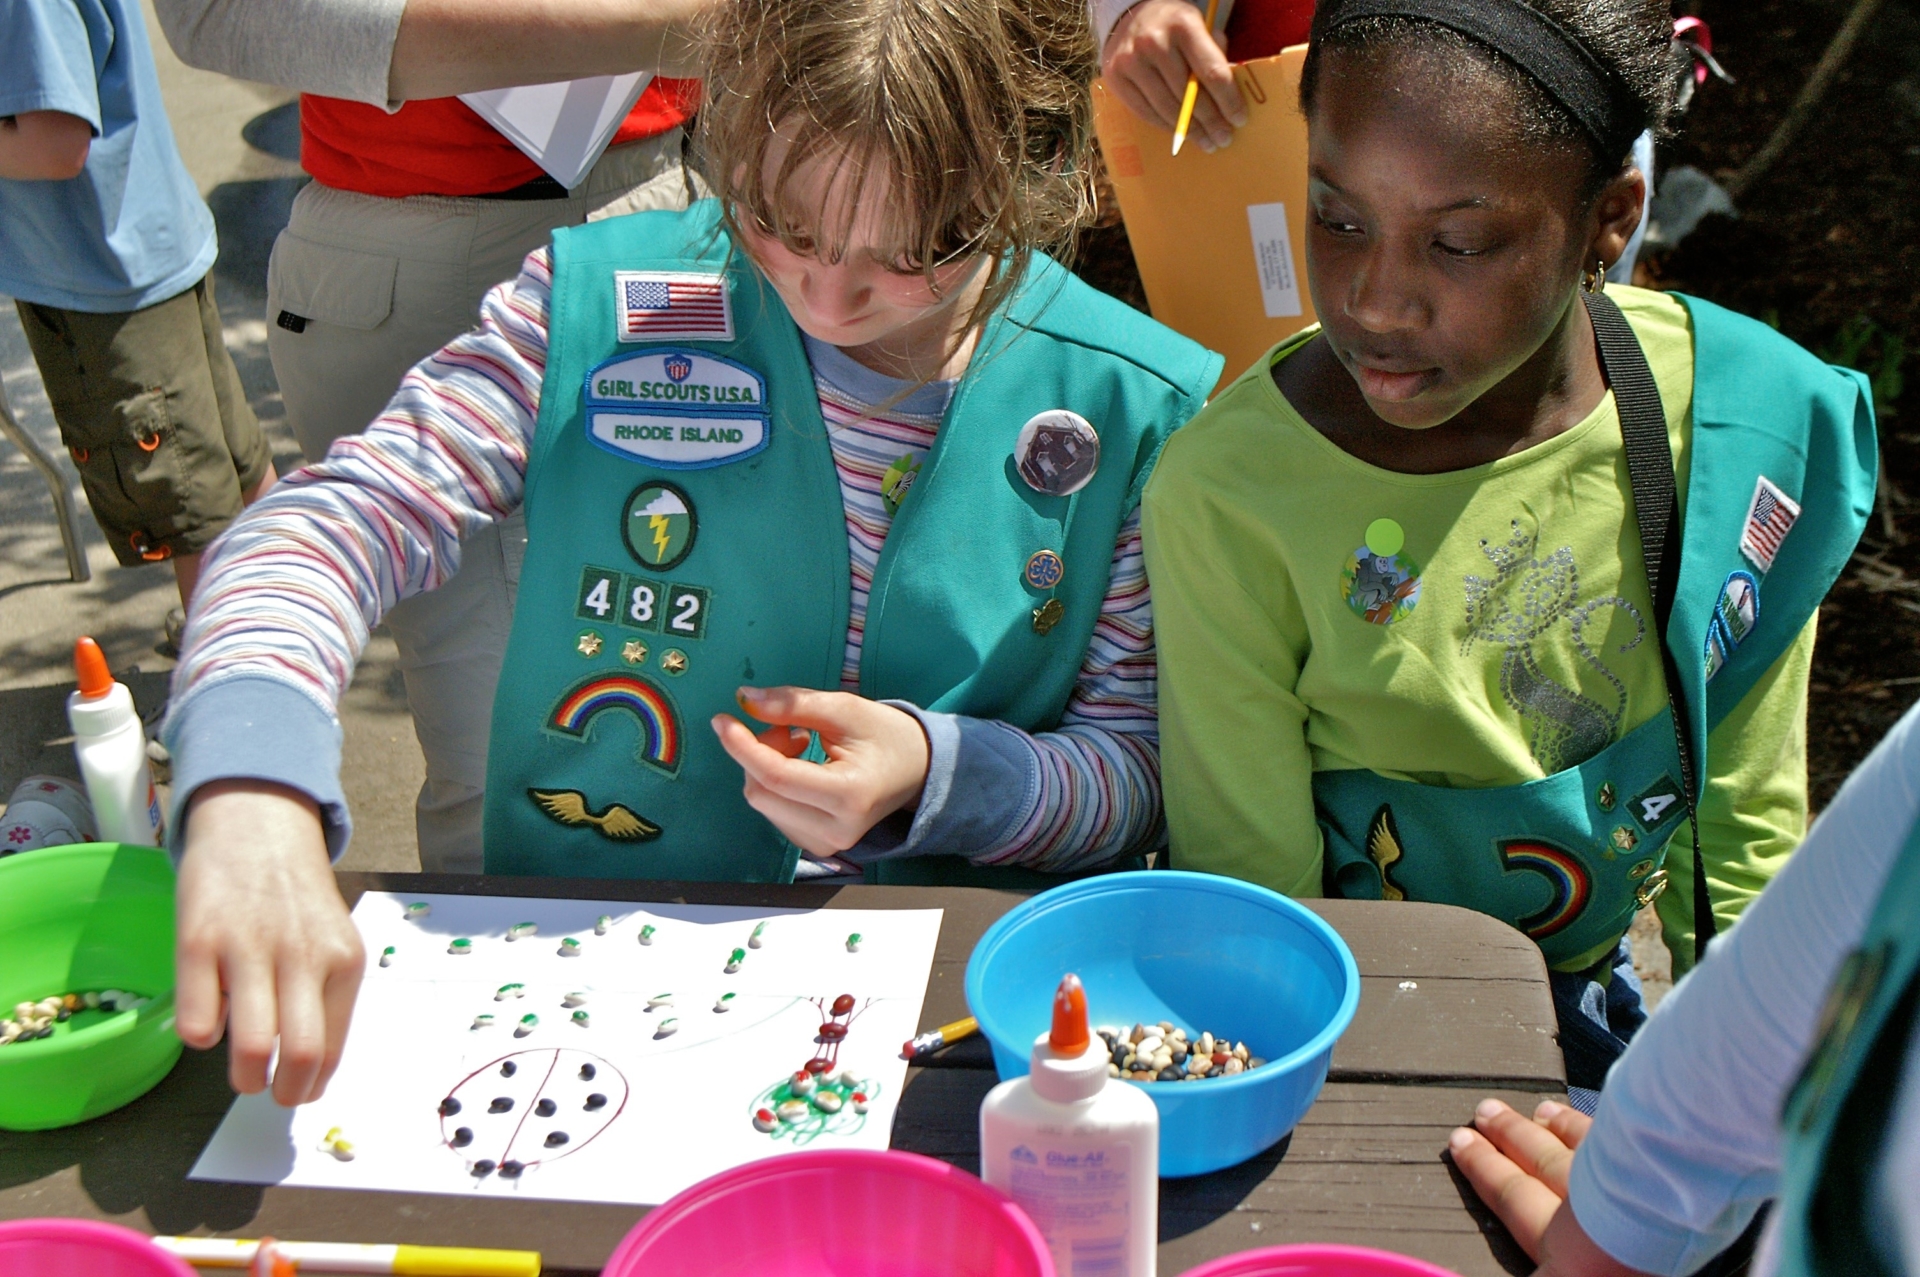 Two girl scouts sitting at a table doing crafts.